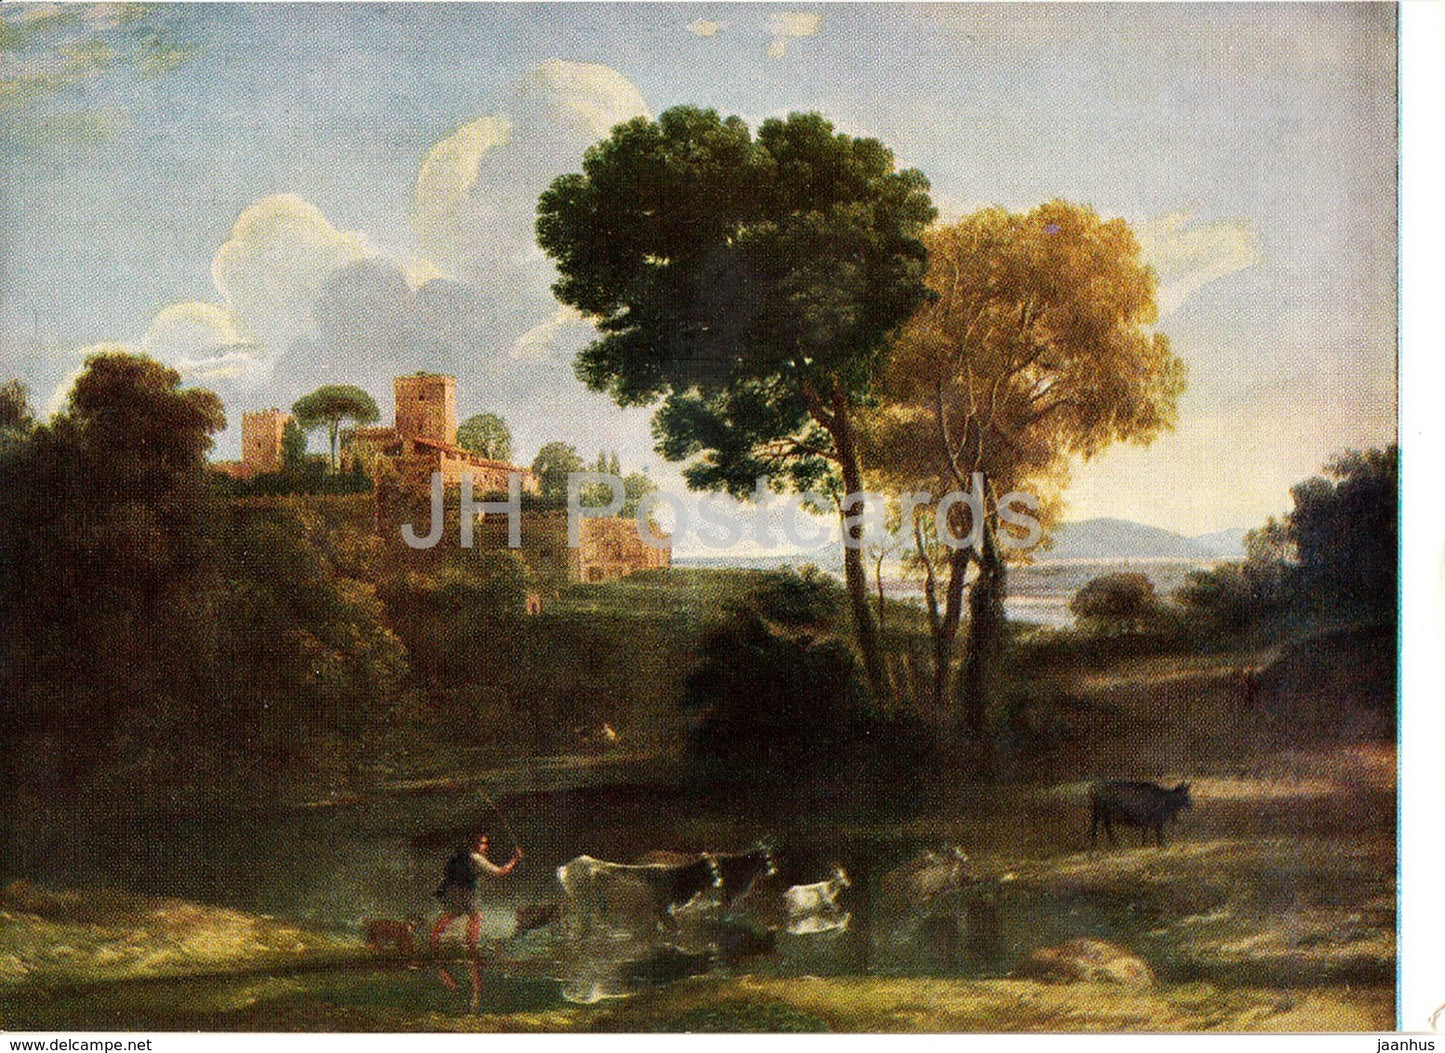 painting by Claude Lorrain - Villa in the Roman Campaigna - French art - Hungary - unused - JH Postcards